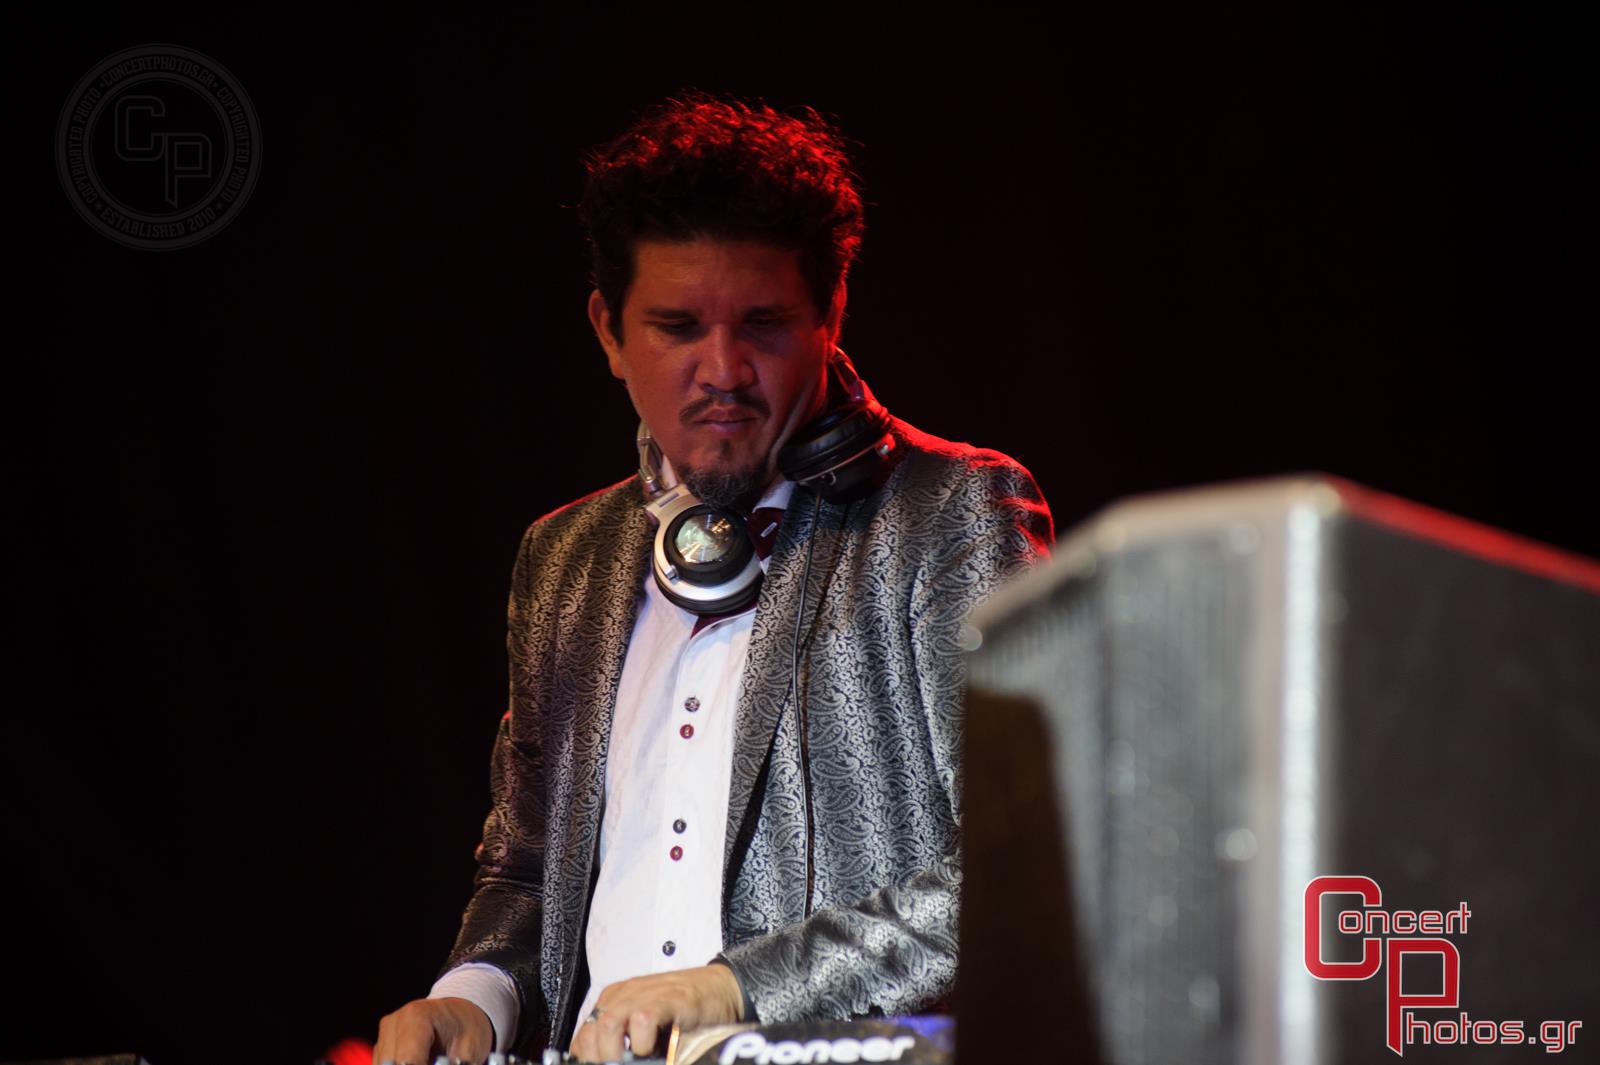 Thievery Corporation Imam Baildi Boogie Belgique Penny And The Swingin' Cats-Thievery Corporation Imam Baildi Boogie Belgique Penny And The Swingin' Cats photographer:  - concertphotos_20140617_23_29_10